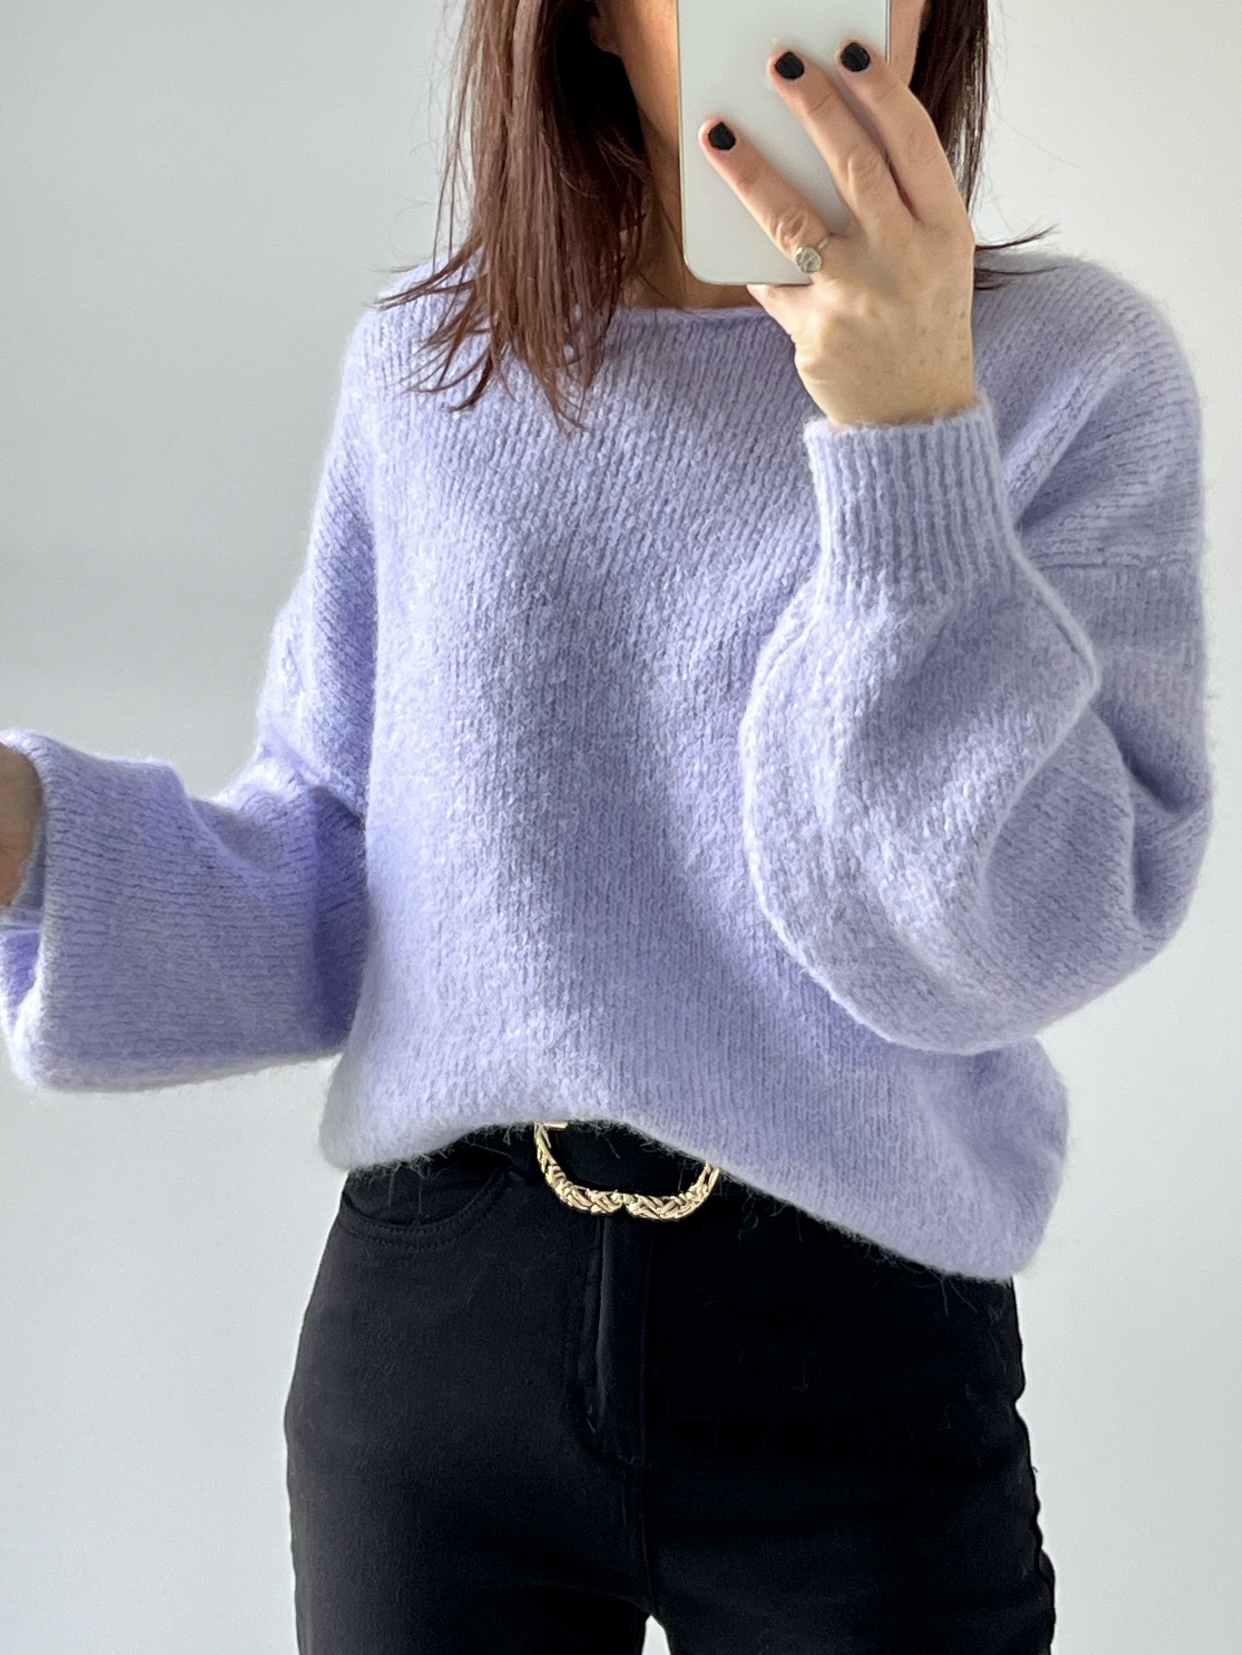 le pull Clem lilas -1